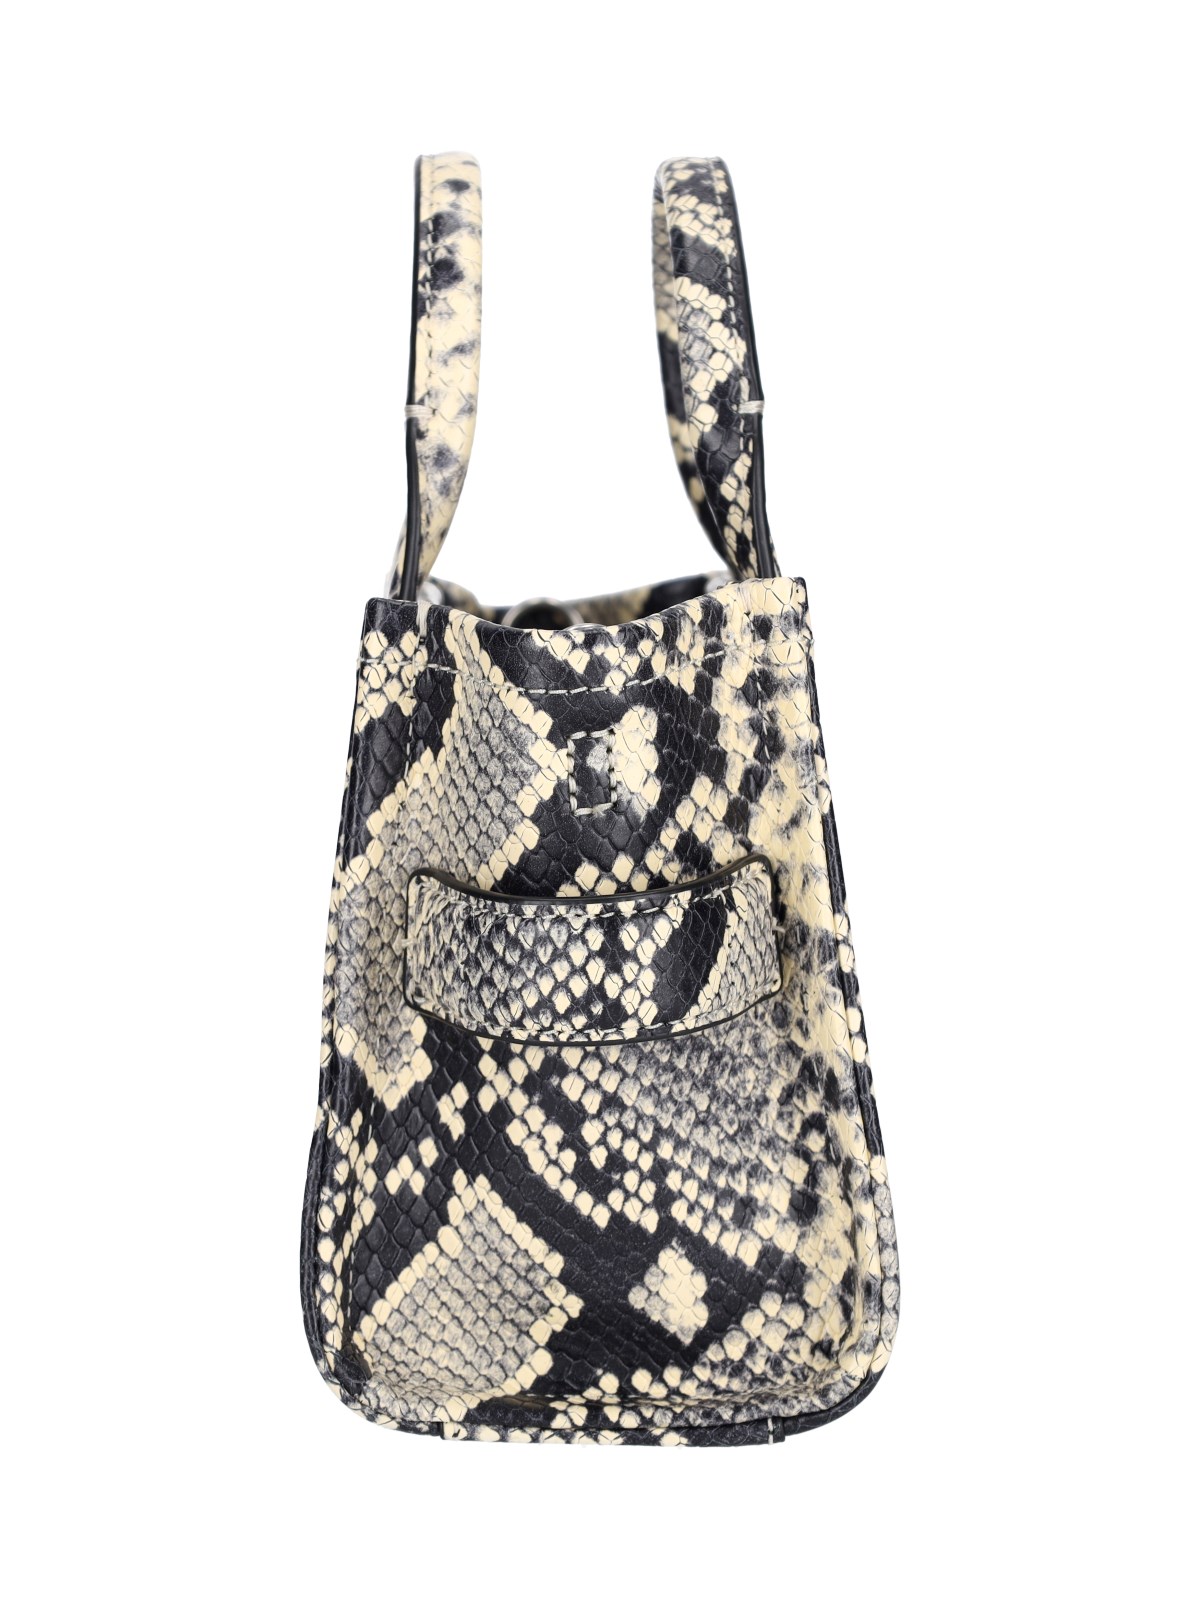 Marc Jacobs - The Python Tote Bag Micro - Beige and black python print  leather bag for women